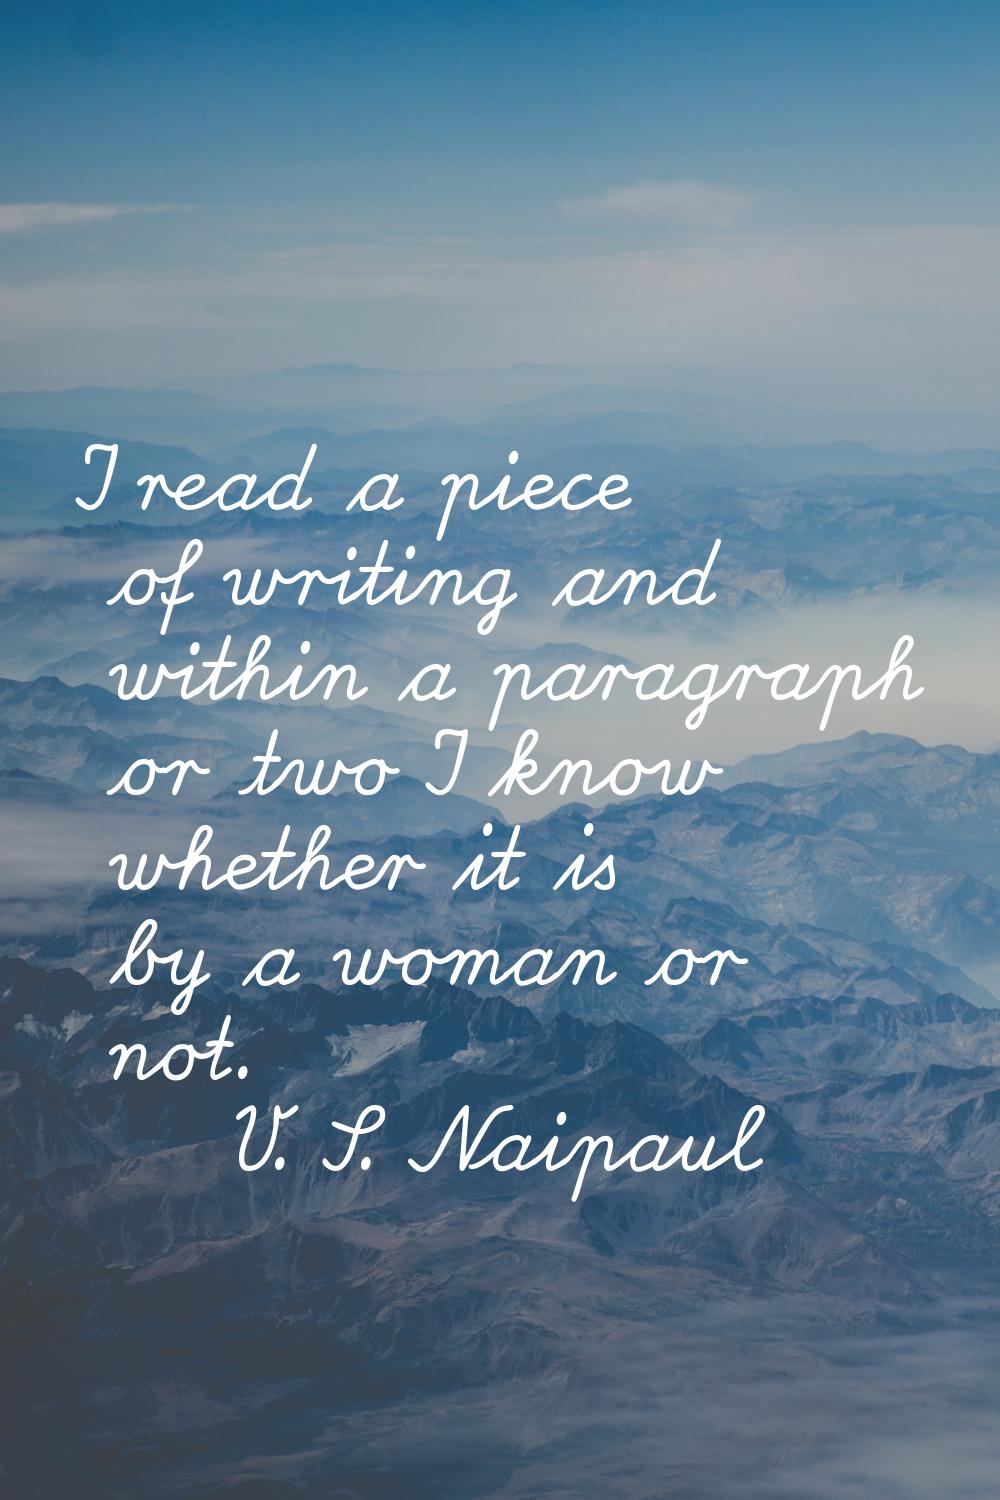 I read a piece of writing and within a paragraph or two I know whether it is by a woman or not.